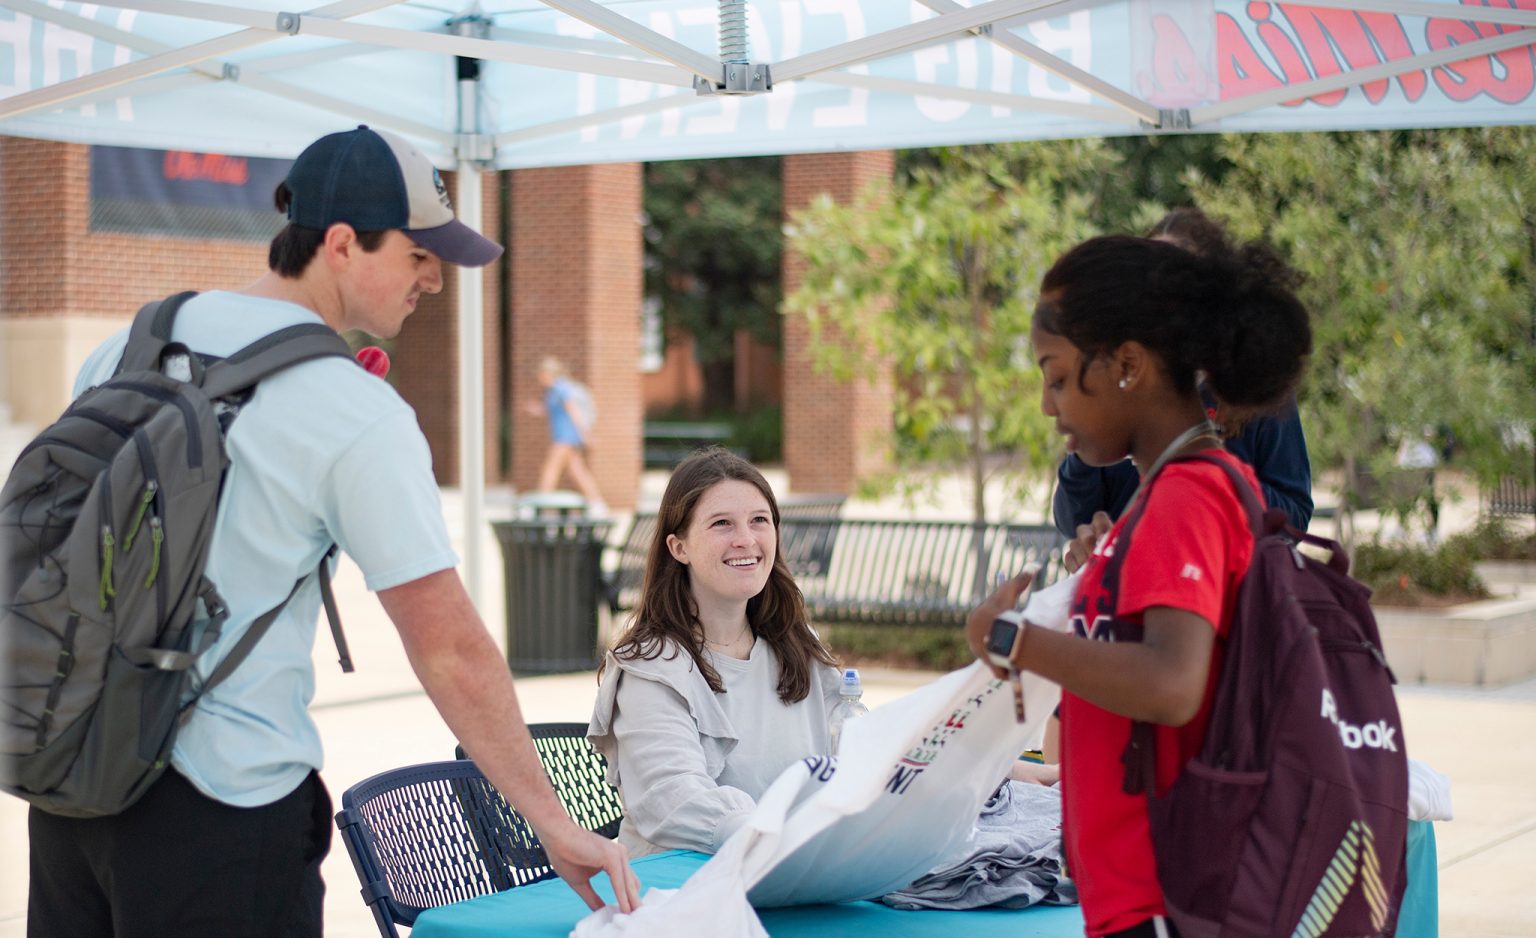 Students browse information about the Big Event at a sign-up table on the Ole Miss Student Union Plaza. Photo by Logan Kirkland/Ole Miss Digital Imaging Services